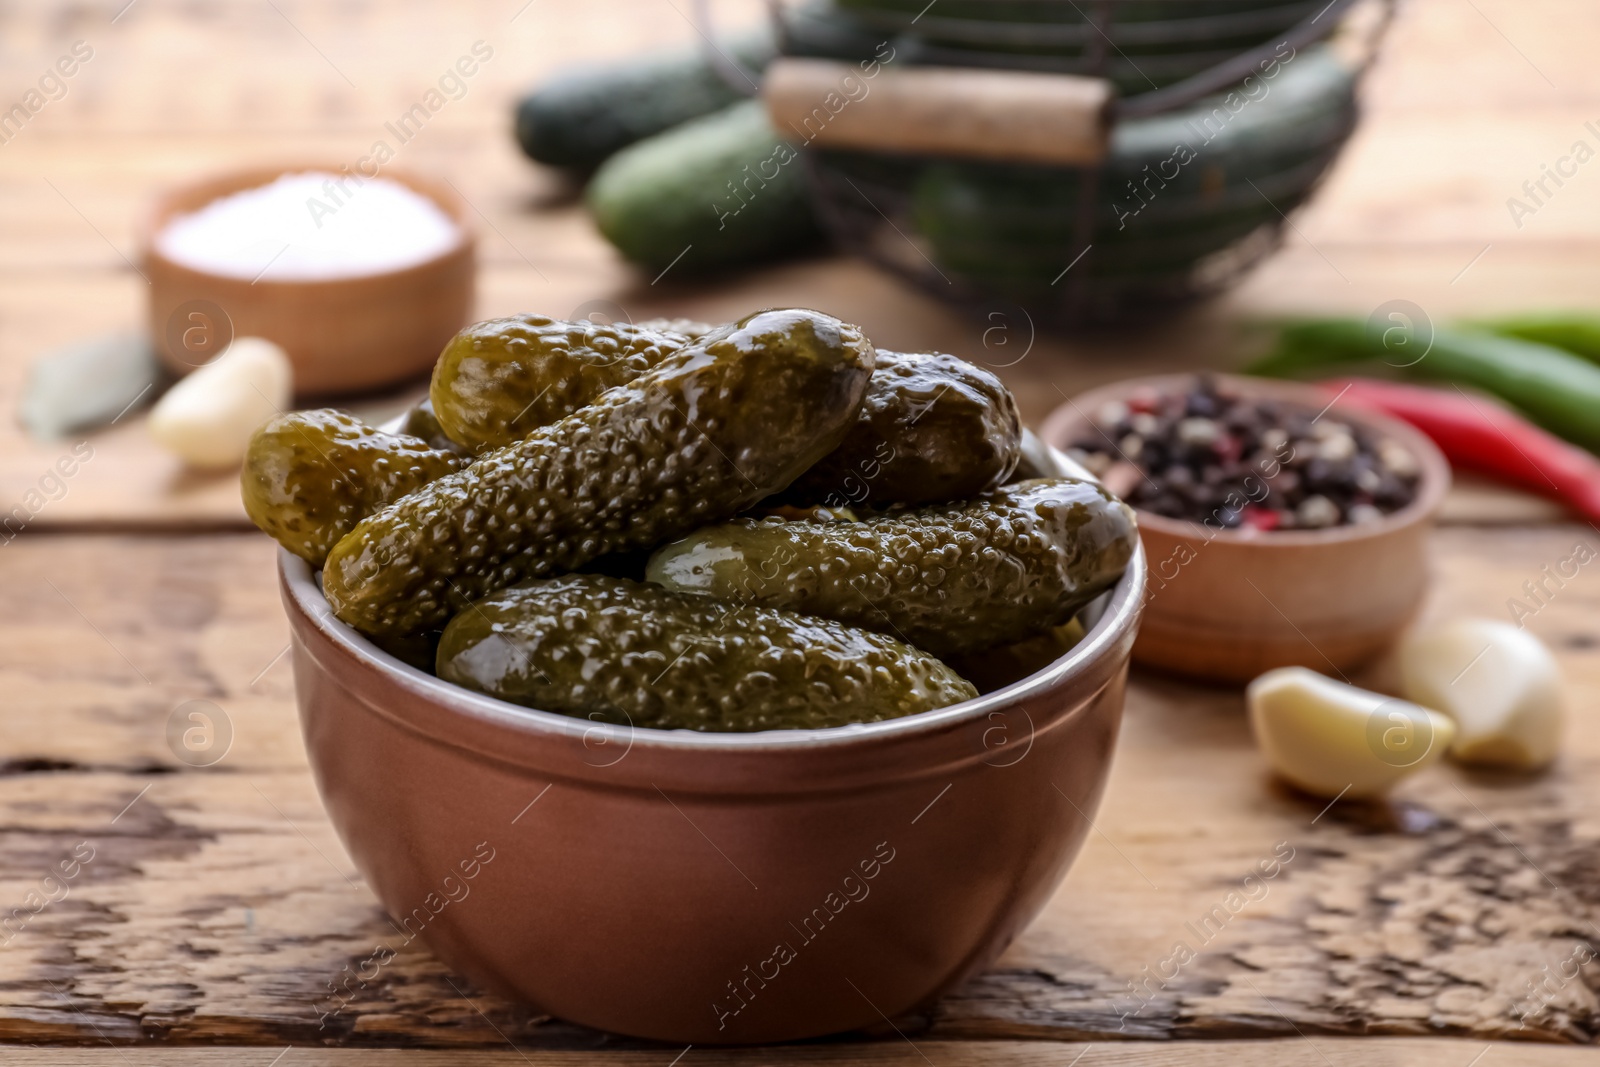 Photo of Bowl of pickled cucumbers and ingredients for food preservation on wooden table